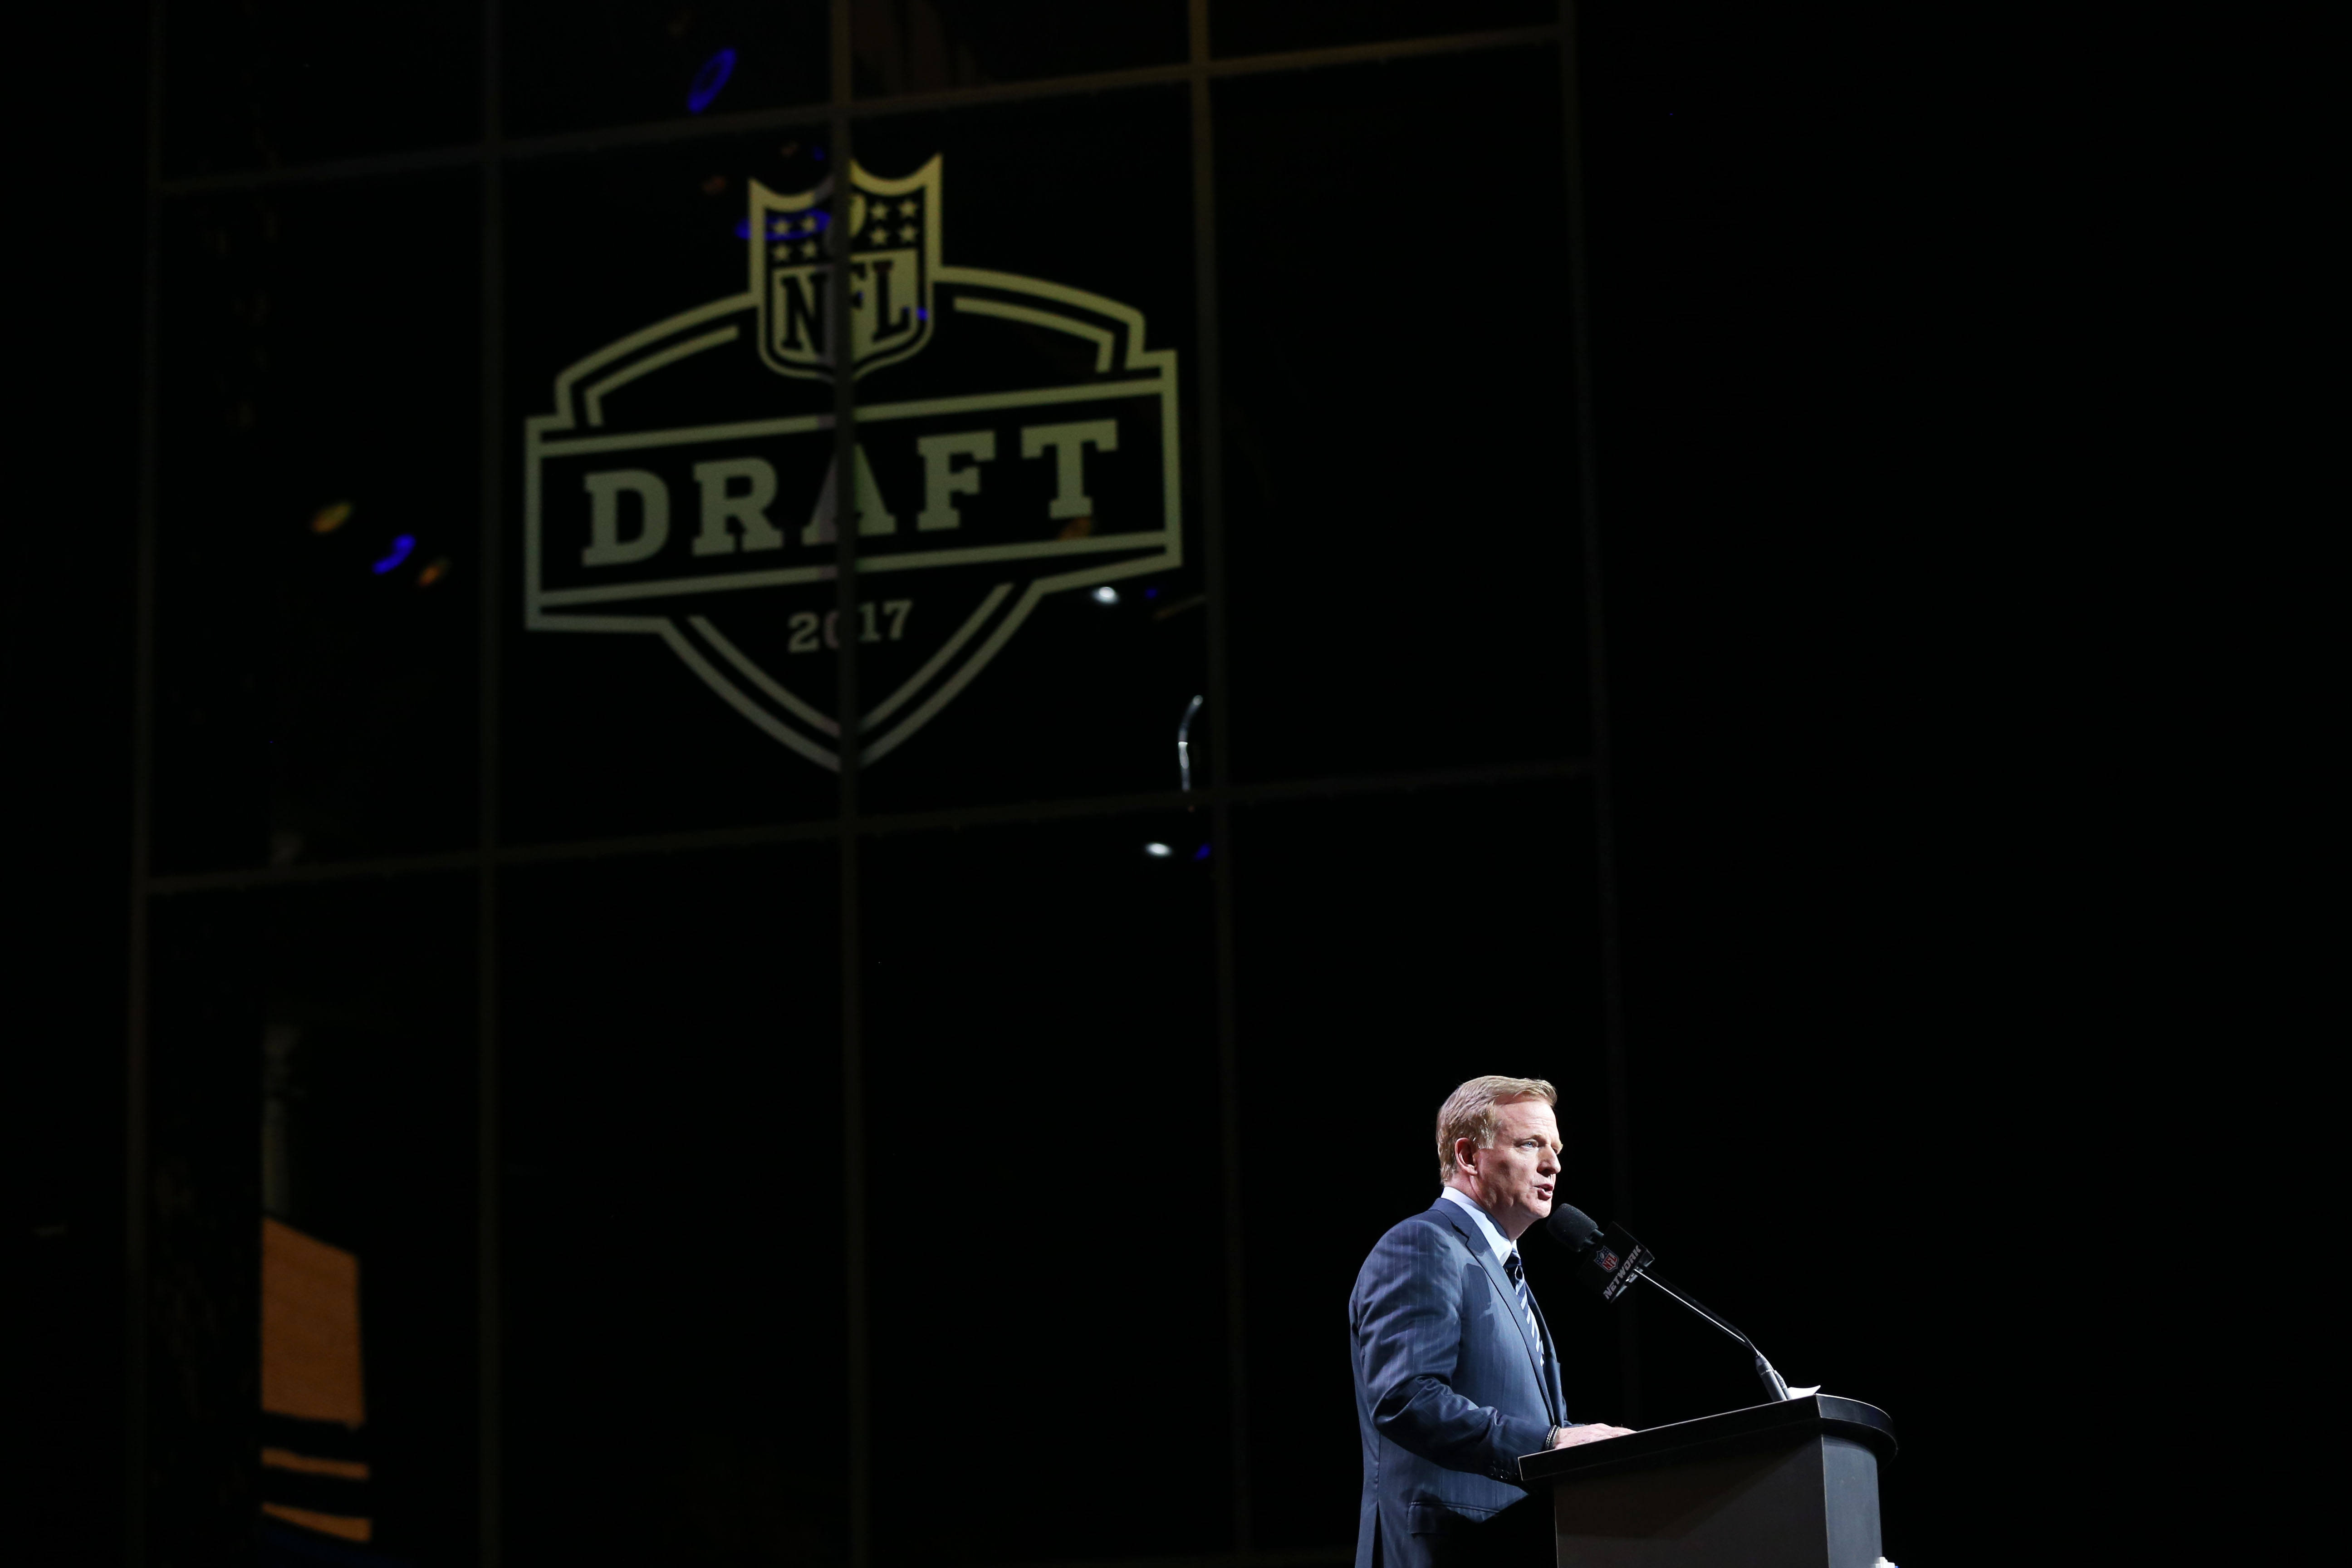 What channel is the NFL Draft on today? Start times, TV schedule